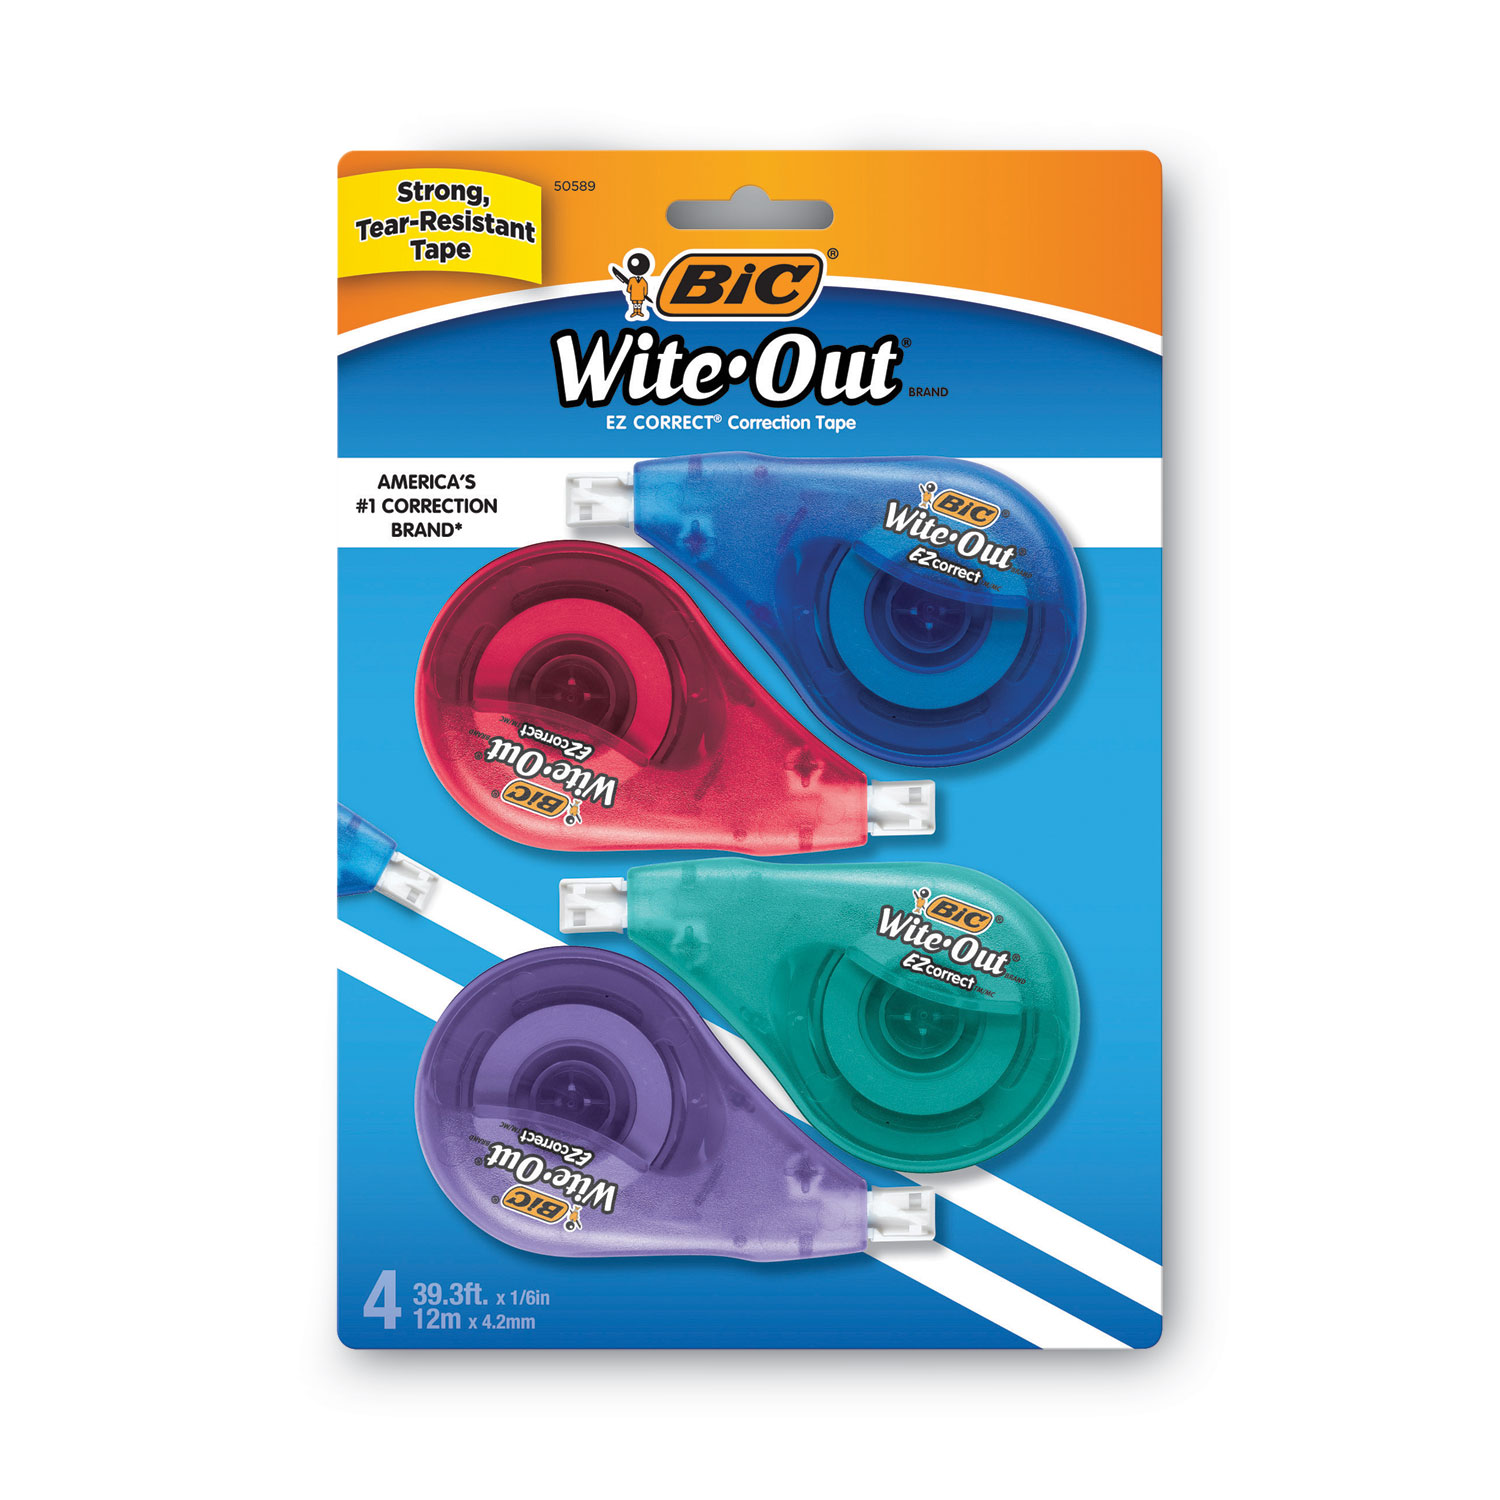 BIC Wite-Out EZ Correct Correction Tape, White, Fast, Clean & Easy